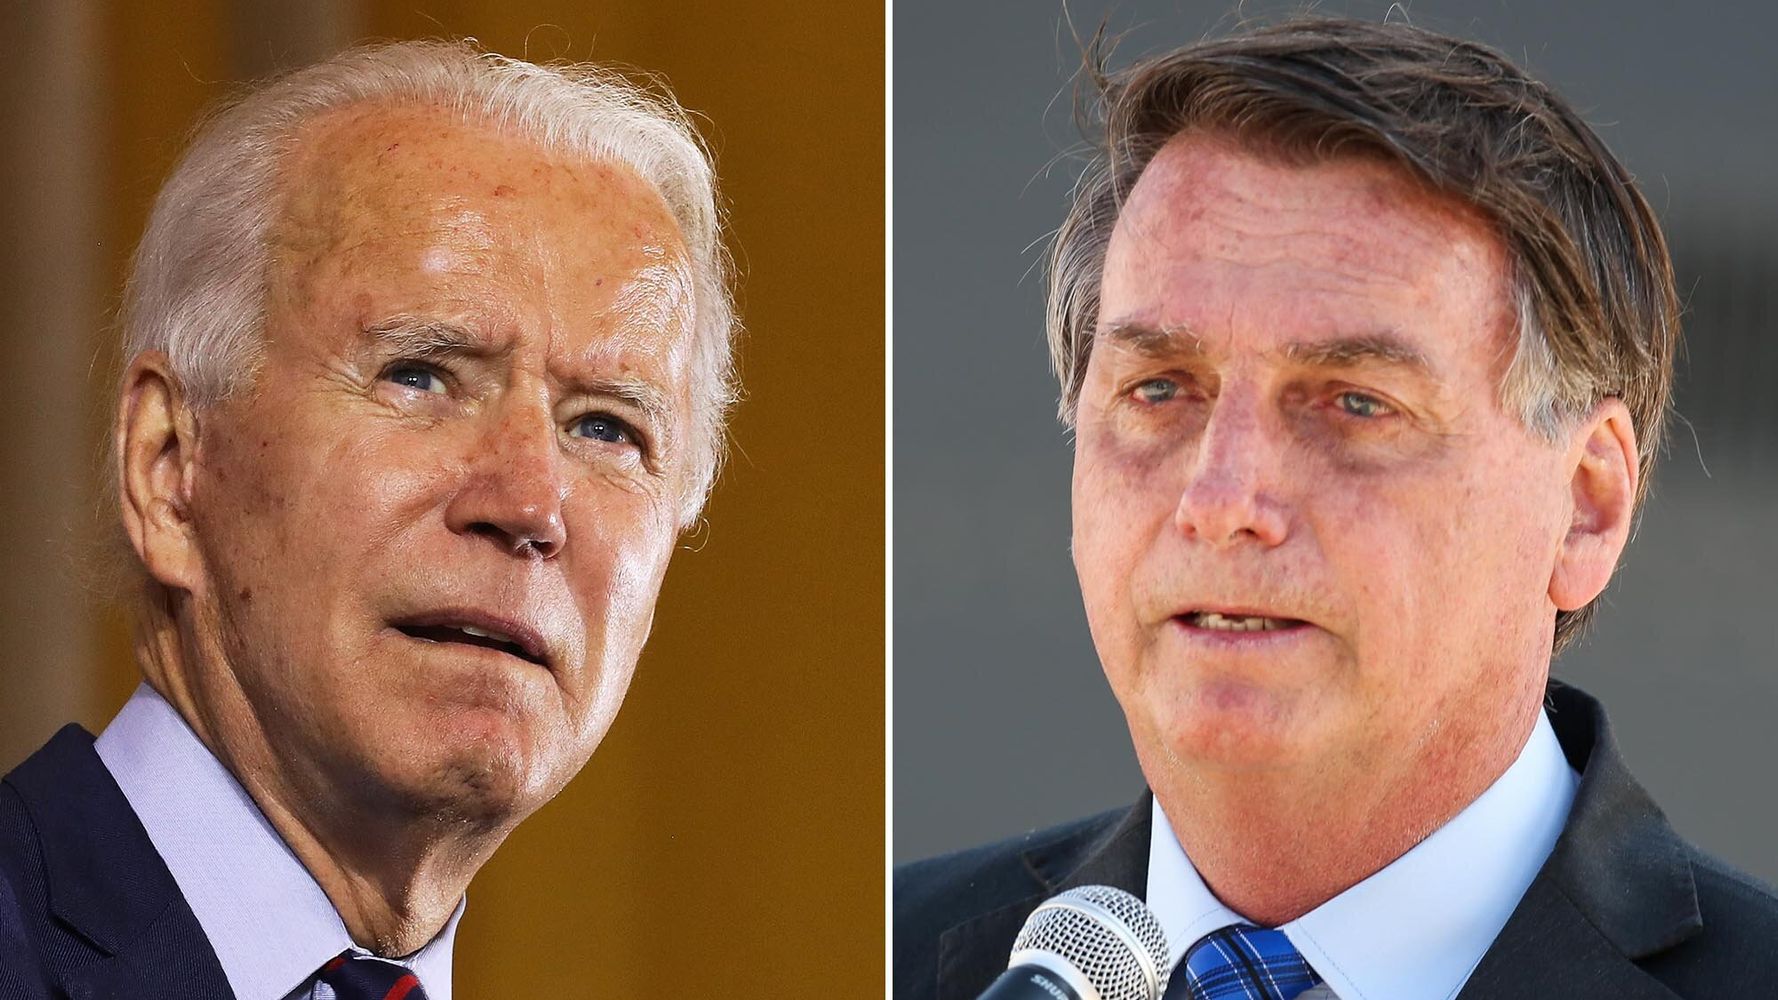 Biden's Approach To Brazil's Bolsonaro Could Prove He's Serious About Climate Change